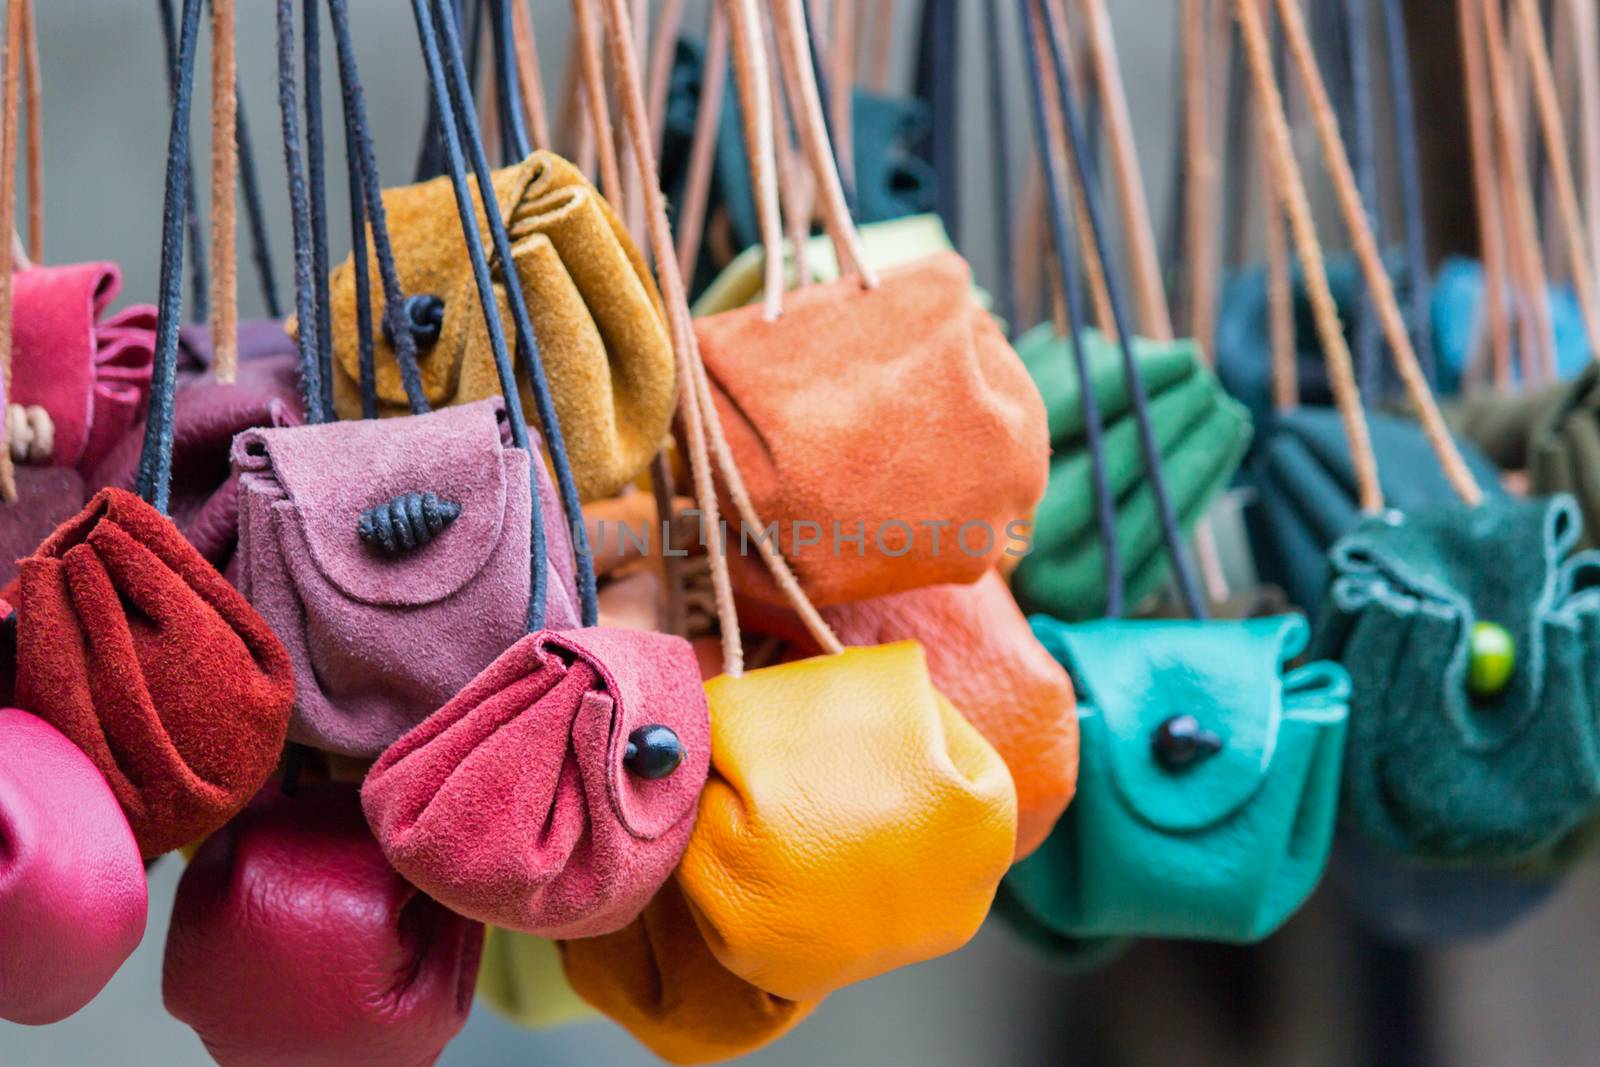 Many colored moneybags hanging in a row by BenSchonewille